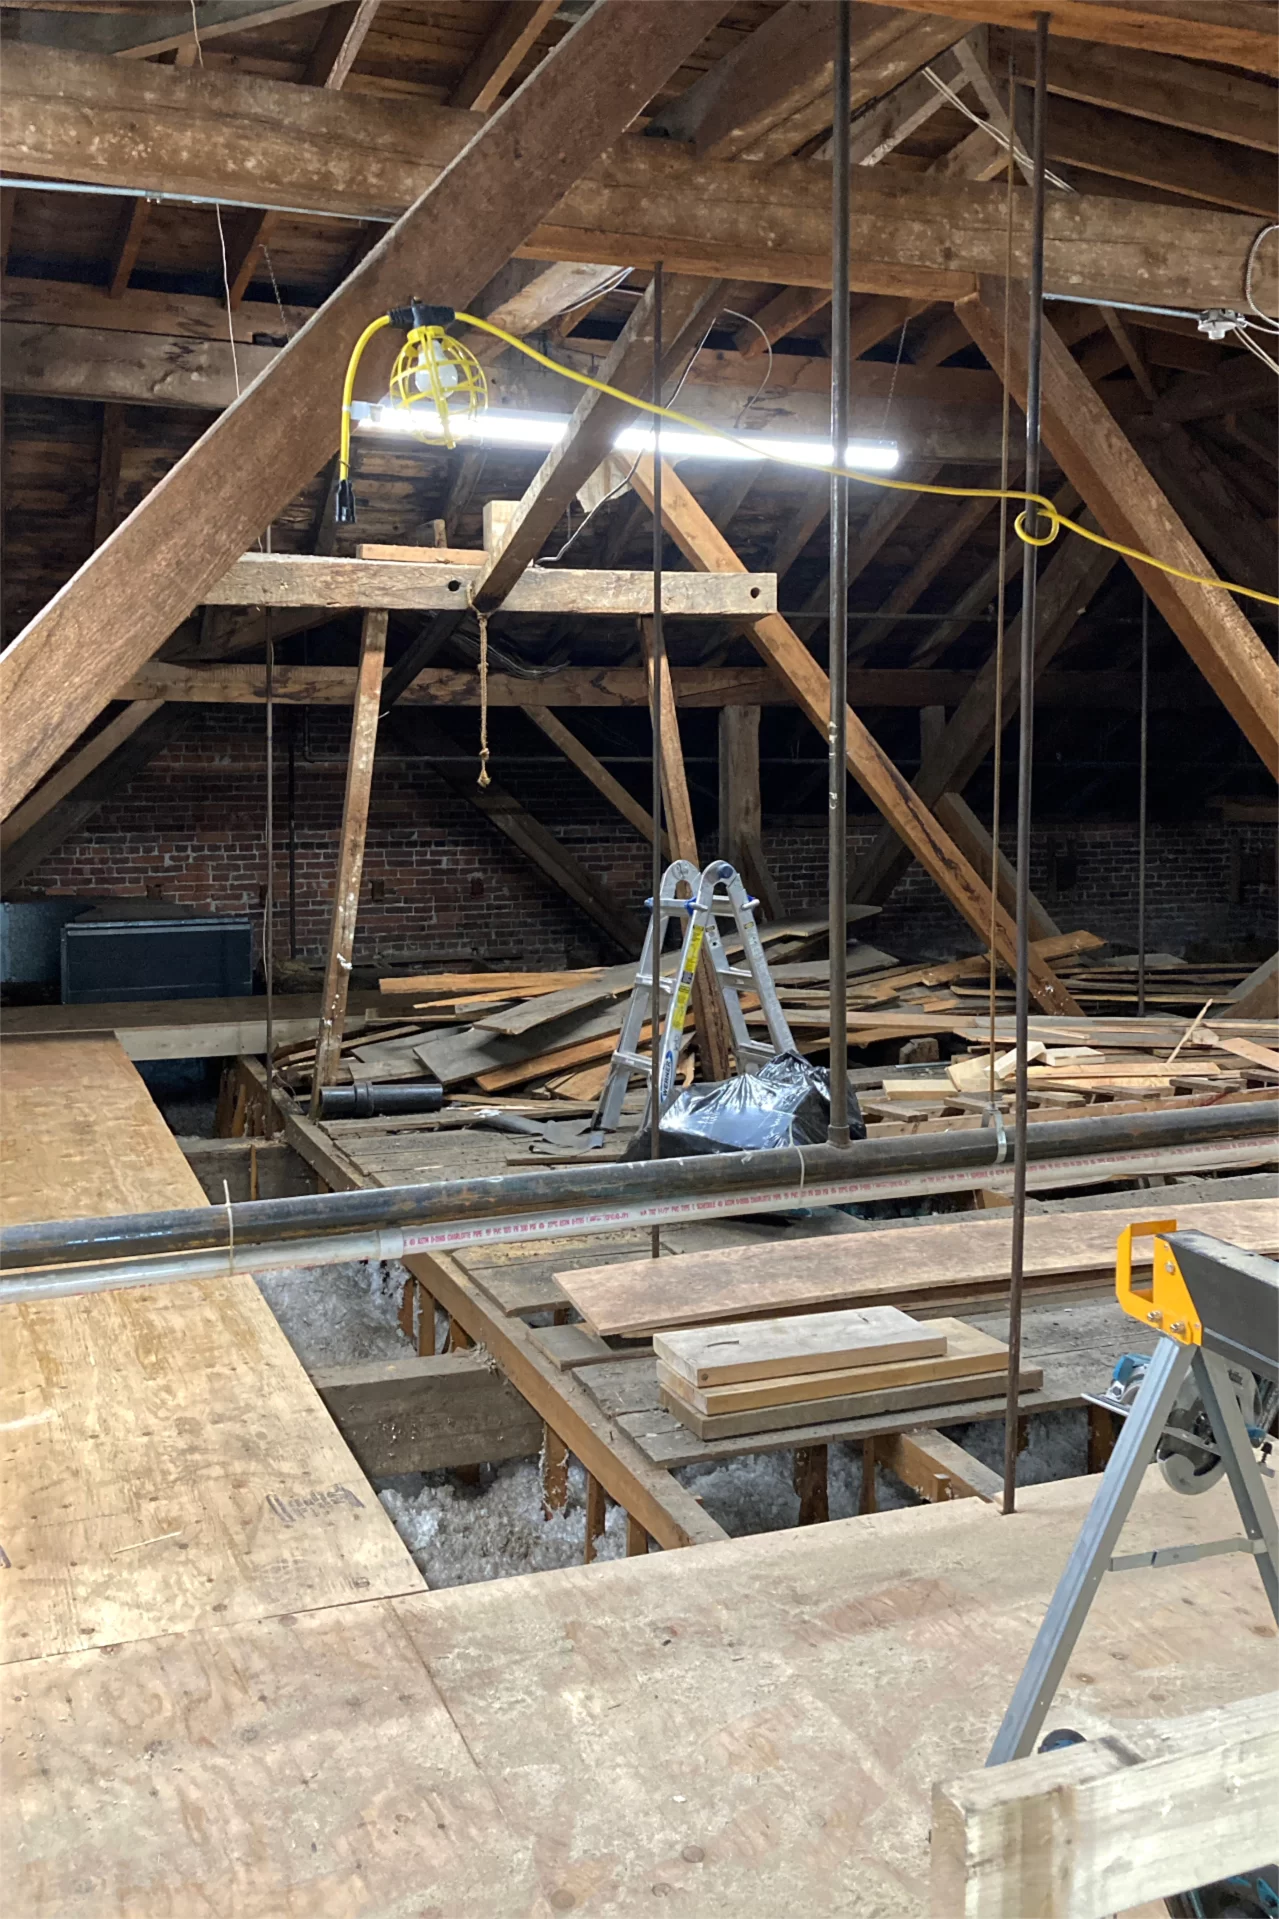 With new walkways and lighting in place, the attic of Hathorn Hall is a much safer and more agreeable place to work. New HVAC equipment will be installed there soon. (Doug Hubley/Bates College)